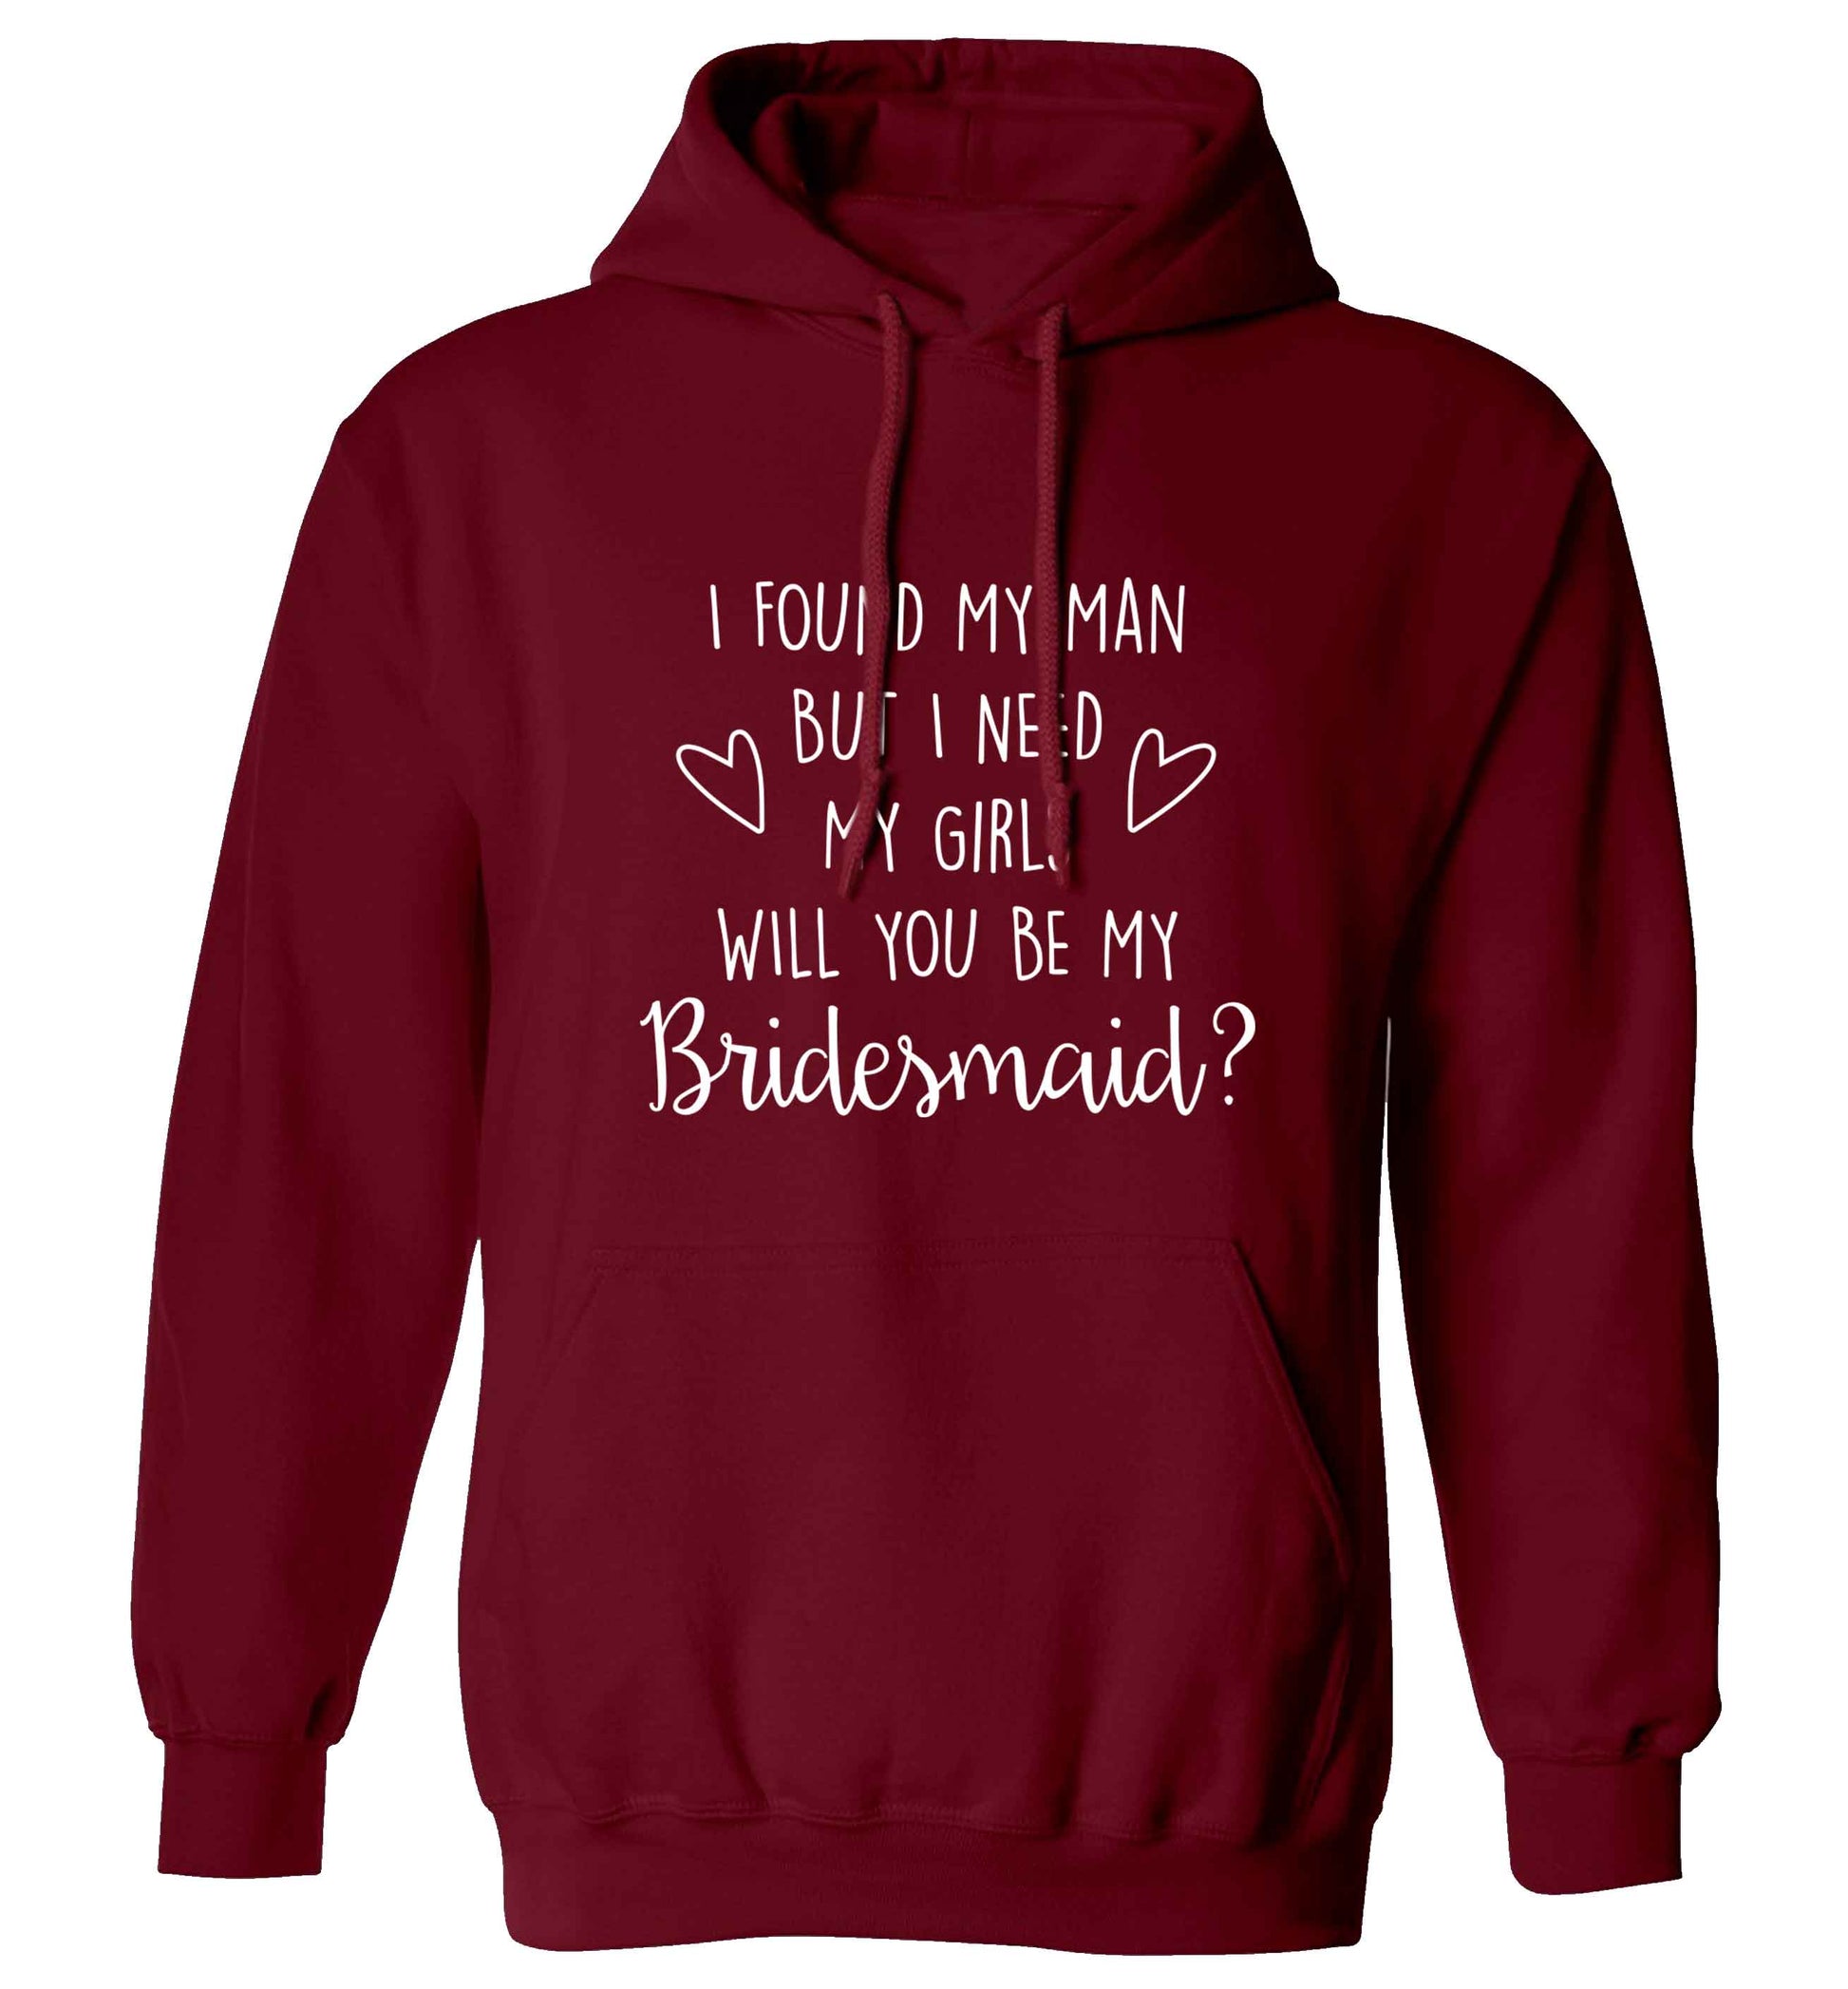 I found my man but I need my girls will you be my bridesmaid? adults unisex maroon hoodie 2XL